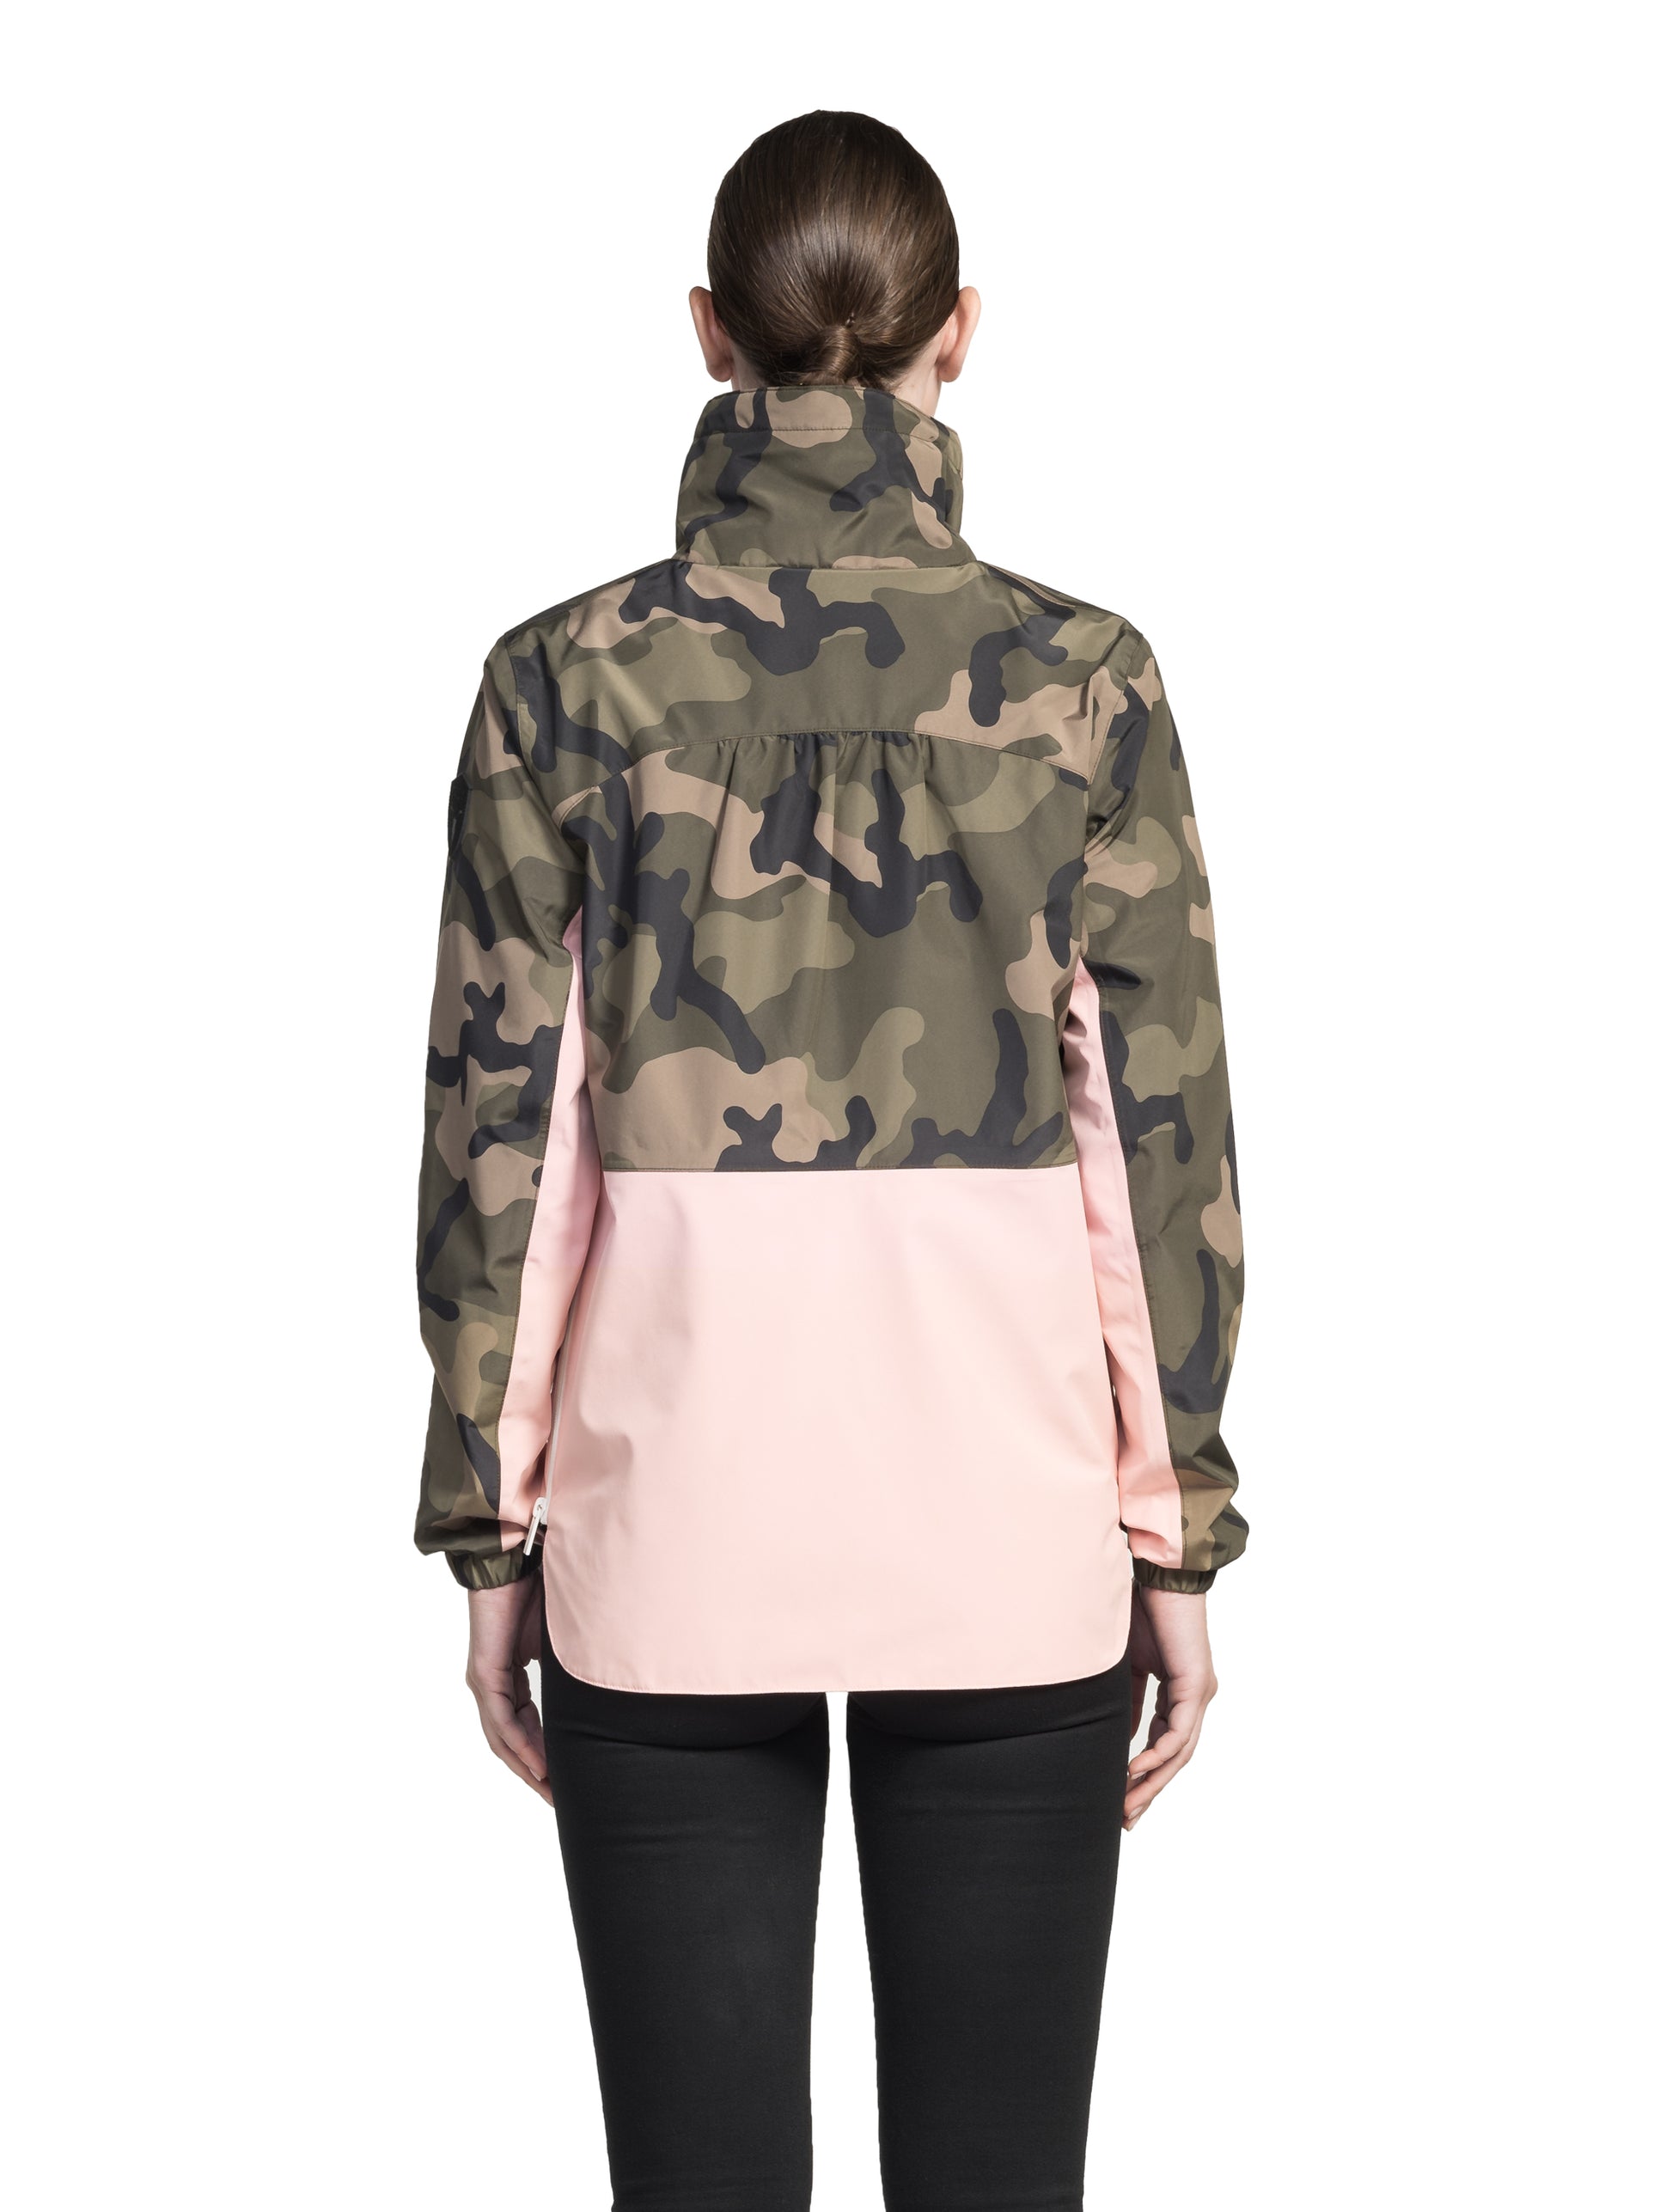 Leah waist length women's jacket in the Camo/Shell Pink